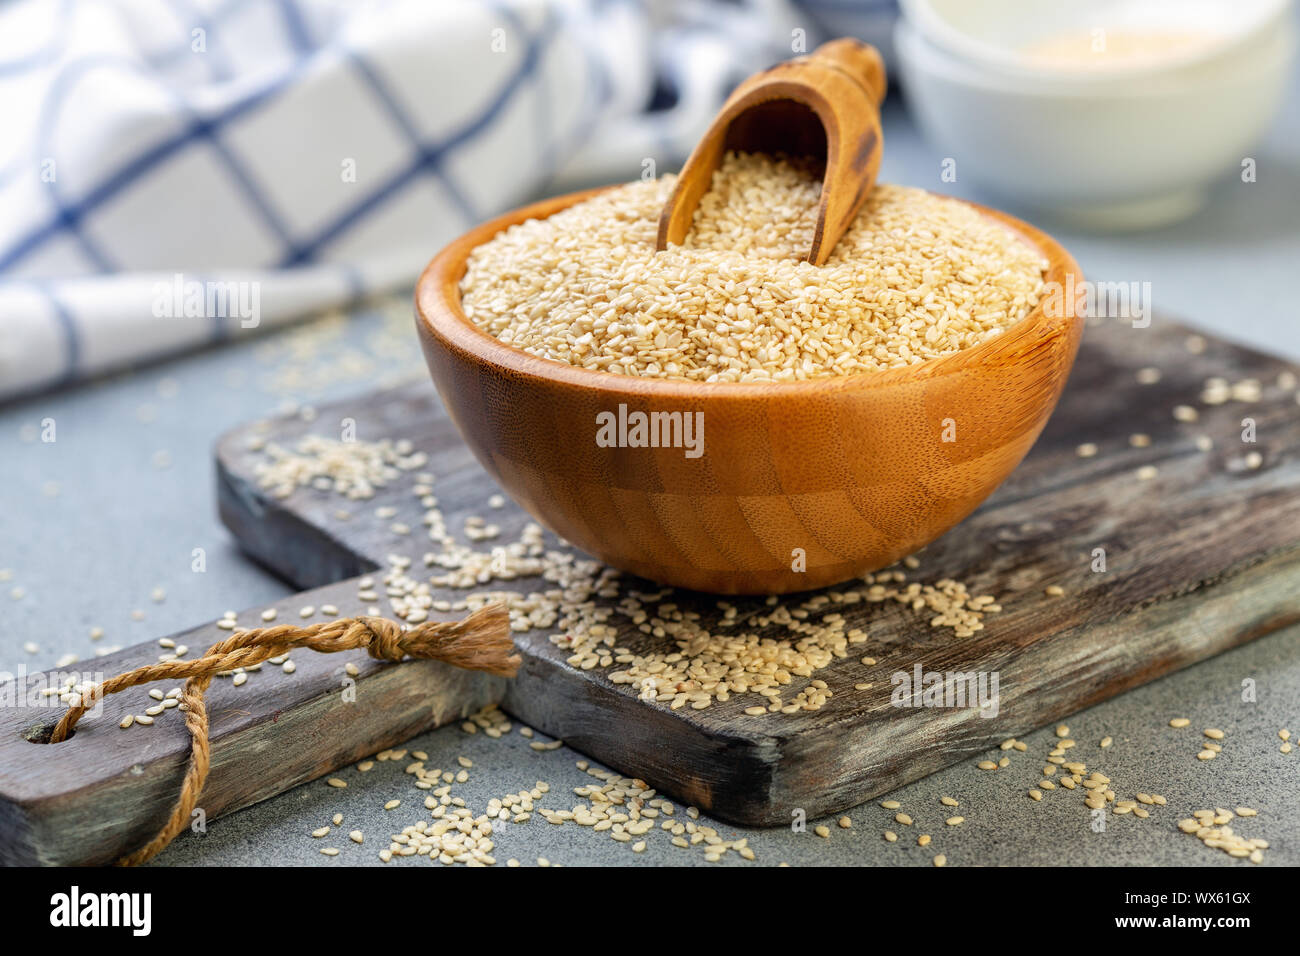 Bowl with sesame seeds and wooden scoop. Stock Photo